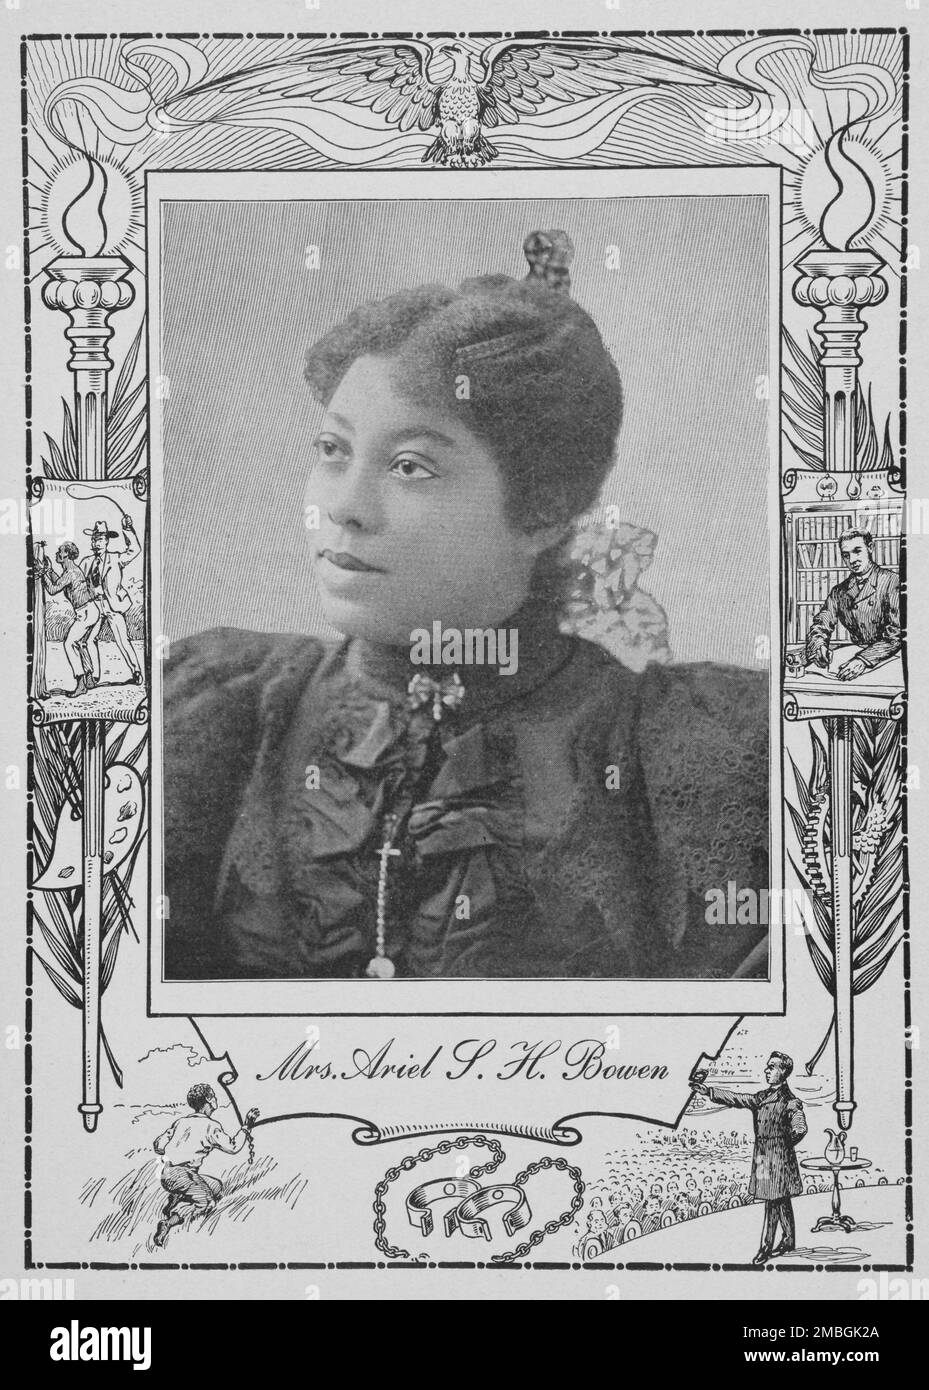 Mrs. Ariel S. H. Bowen [recto], 1902. African-American writer, temperance activist Ariel Serena Hedges Bowen, professor of music at Clark University in Atlanta. Life member of the Woman's Foreign Missionary Society of the Methodist Episcopal Church. From a 'cyclopedia of thought on the vital topics relating to' black Americans. Stock Photo